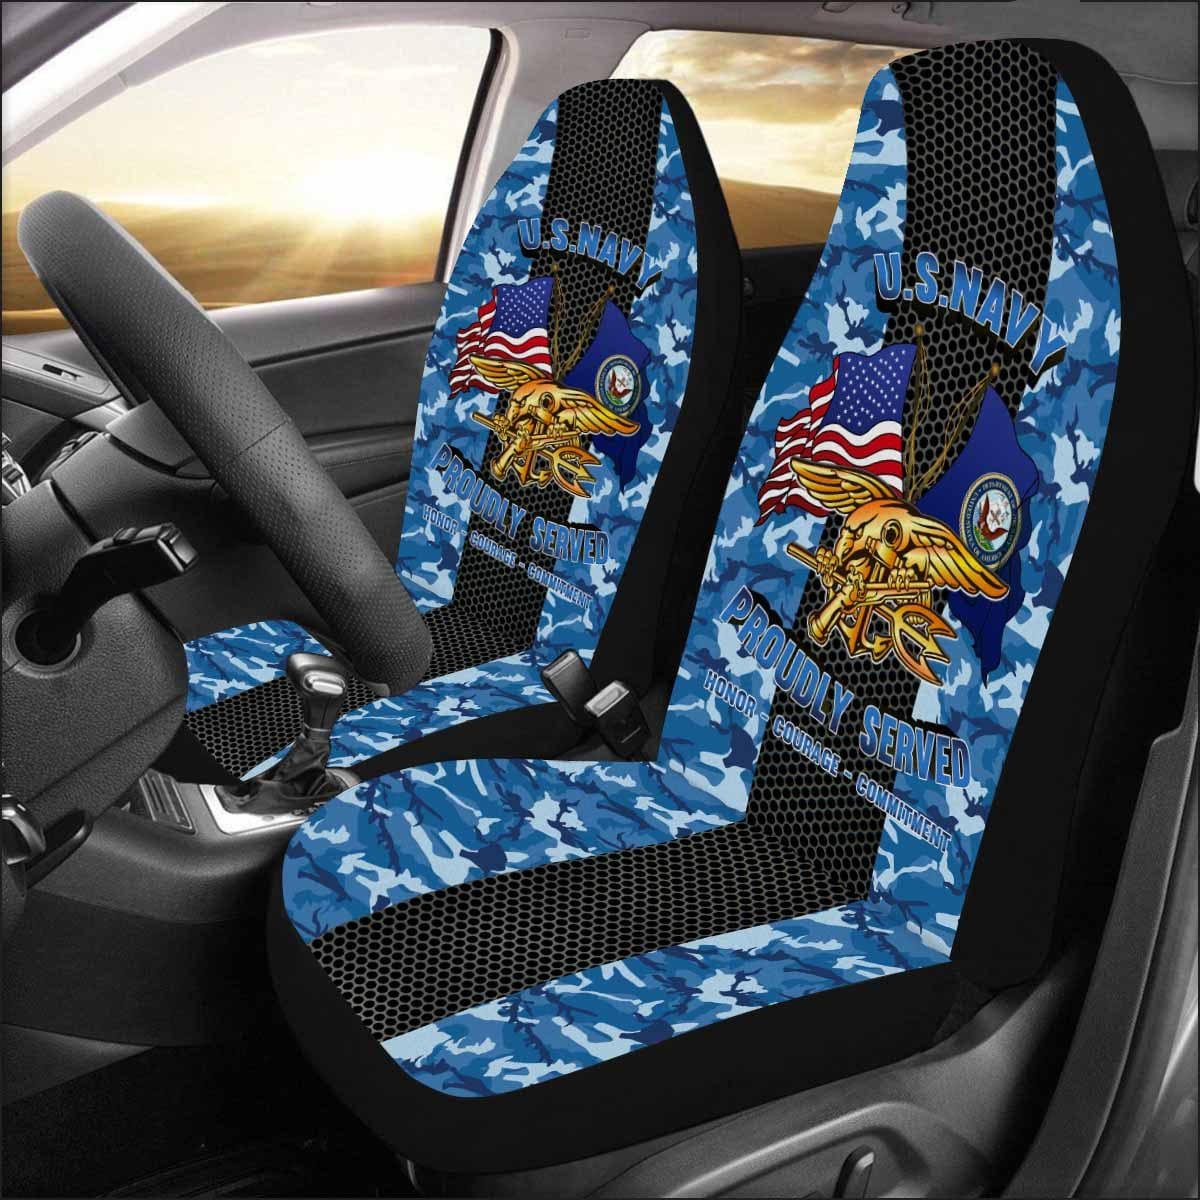 U.S NAVY SPECIAL WARFARE (SEAL) Car Seat Covers (Set of 2)-SeatCovers-Navy-Badge-Veterans Nation